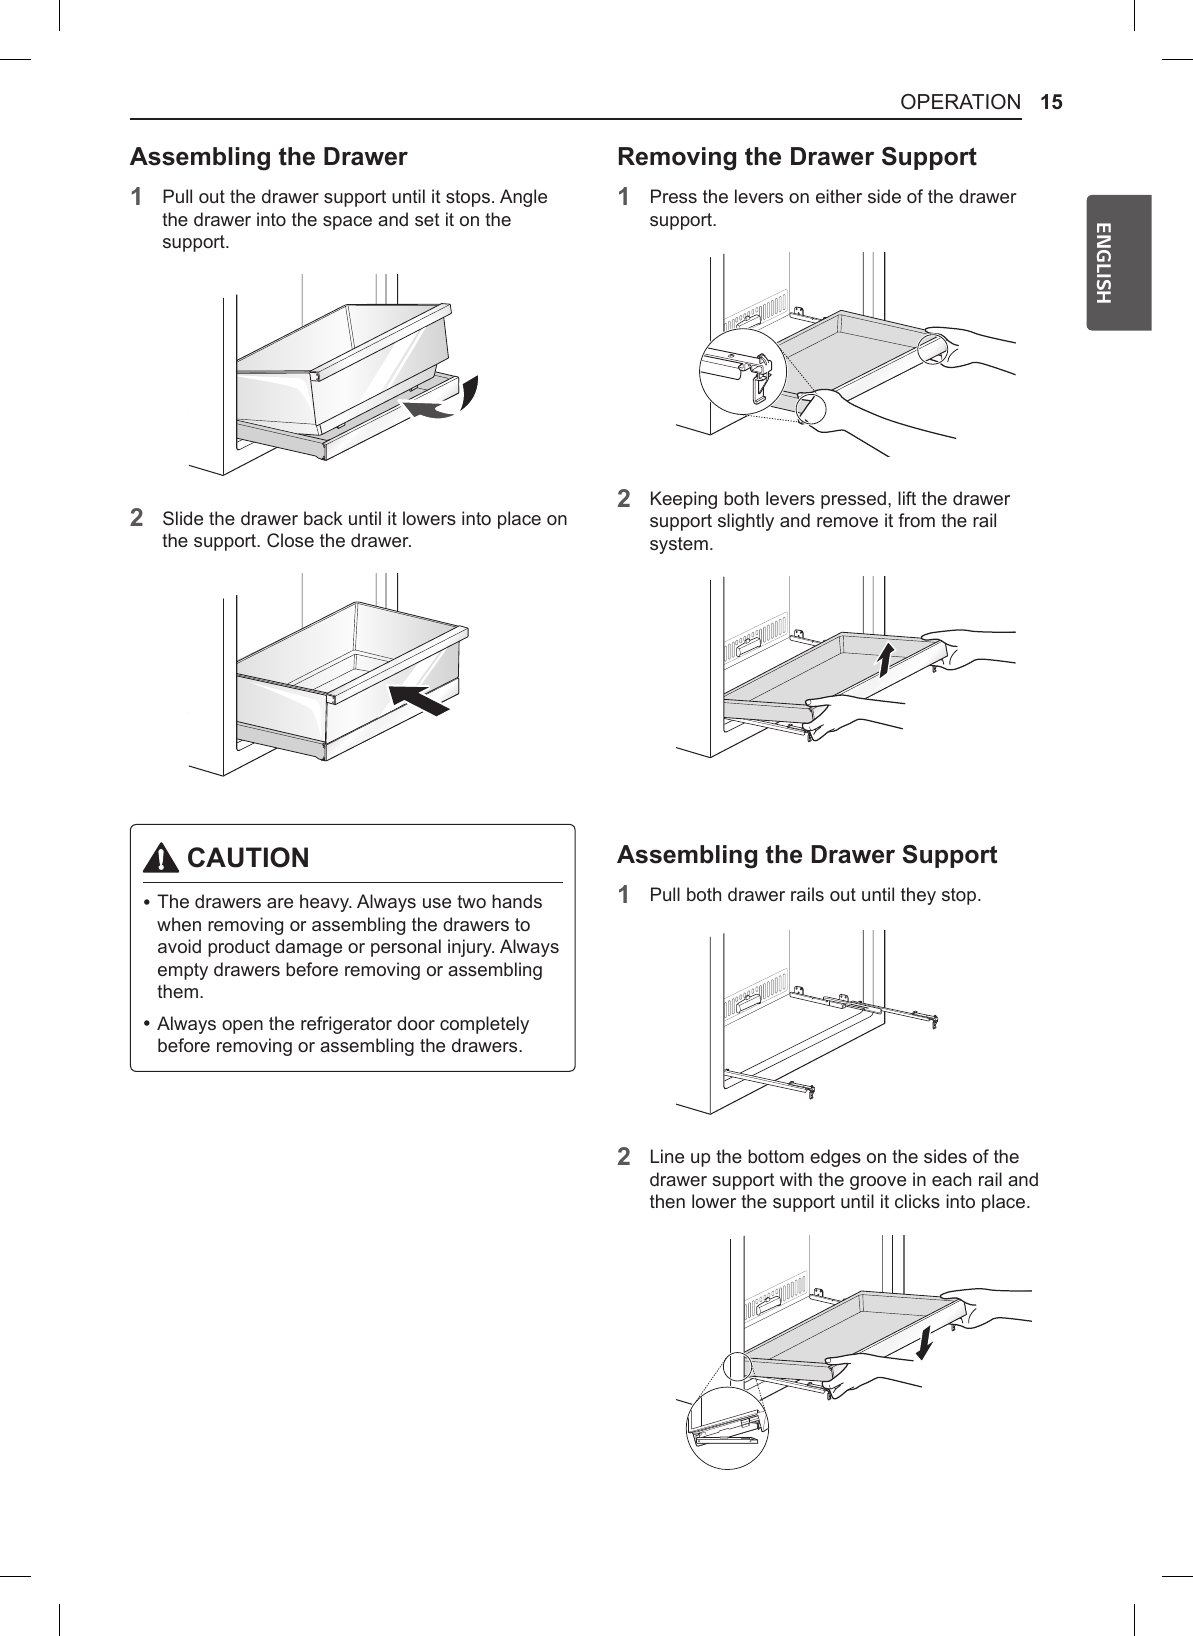 15OPERATIONENGLISHAssembling the Drawer1Pull out the drawer support until it stops. Angle the drawer into the space and set it on the support.2Slide the drawer back until it lowers into place on the support. Close the drawer. CAUTION •The drawers are heavy. Always use two hands when removing or assembling the drawers to avoid product damage or personal injury. Always empty drawers before removing or assembling them. •Always open the refrigerator door completely before removing or assembling the drawers.Removing the Drawer Support1Press the levers on either side of the drawer support.2Keeping both levers pressed, lift the drawer support slightly and remove it from the rail system.Assembling the Drawer Support1Pull both drawer rails out until they stop.2Line up the bottom edges on the sides of the drawer support with the groove in each rail and then lower the support until it clicks into place.